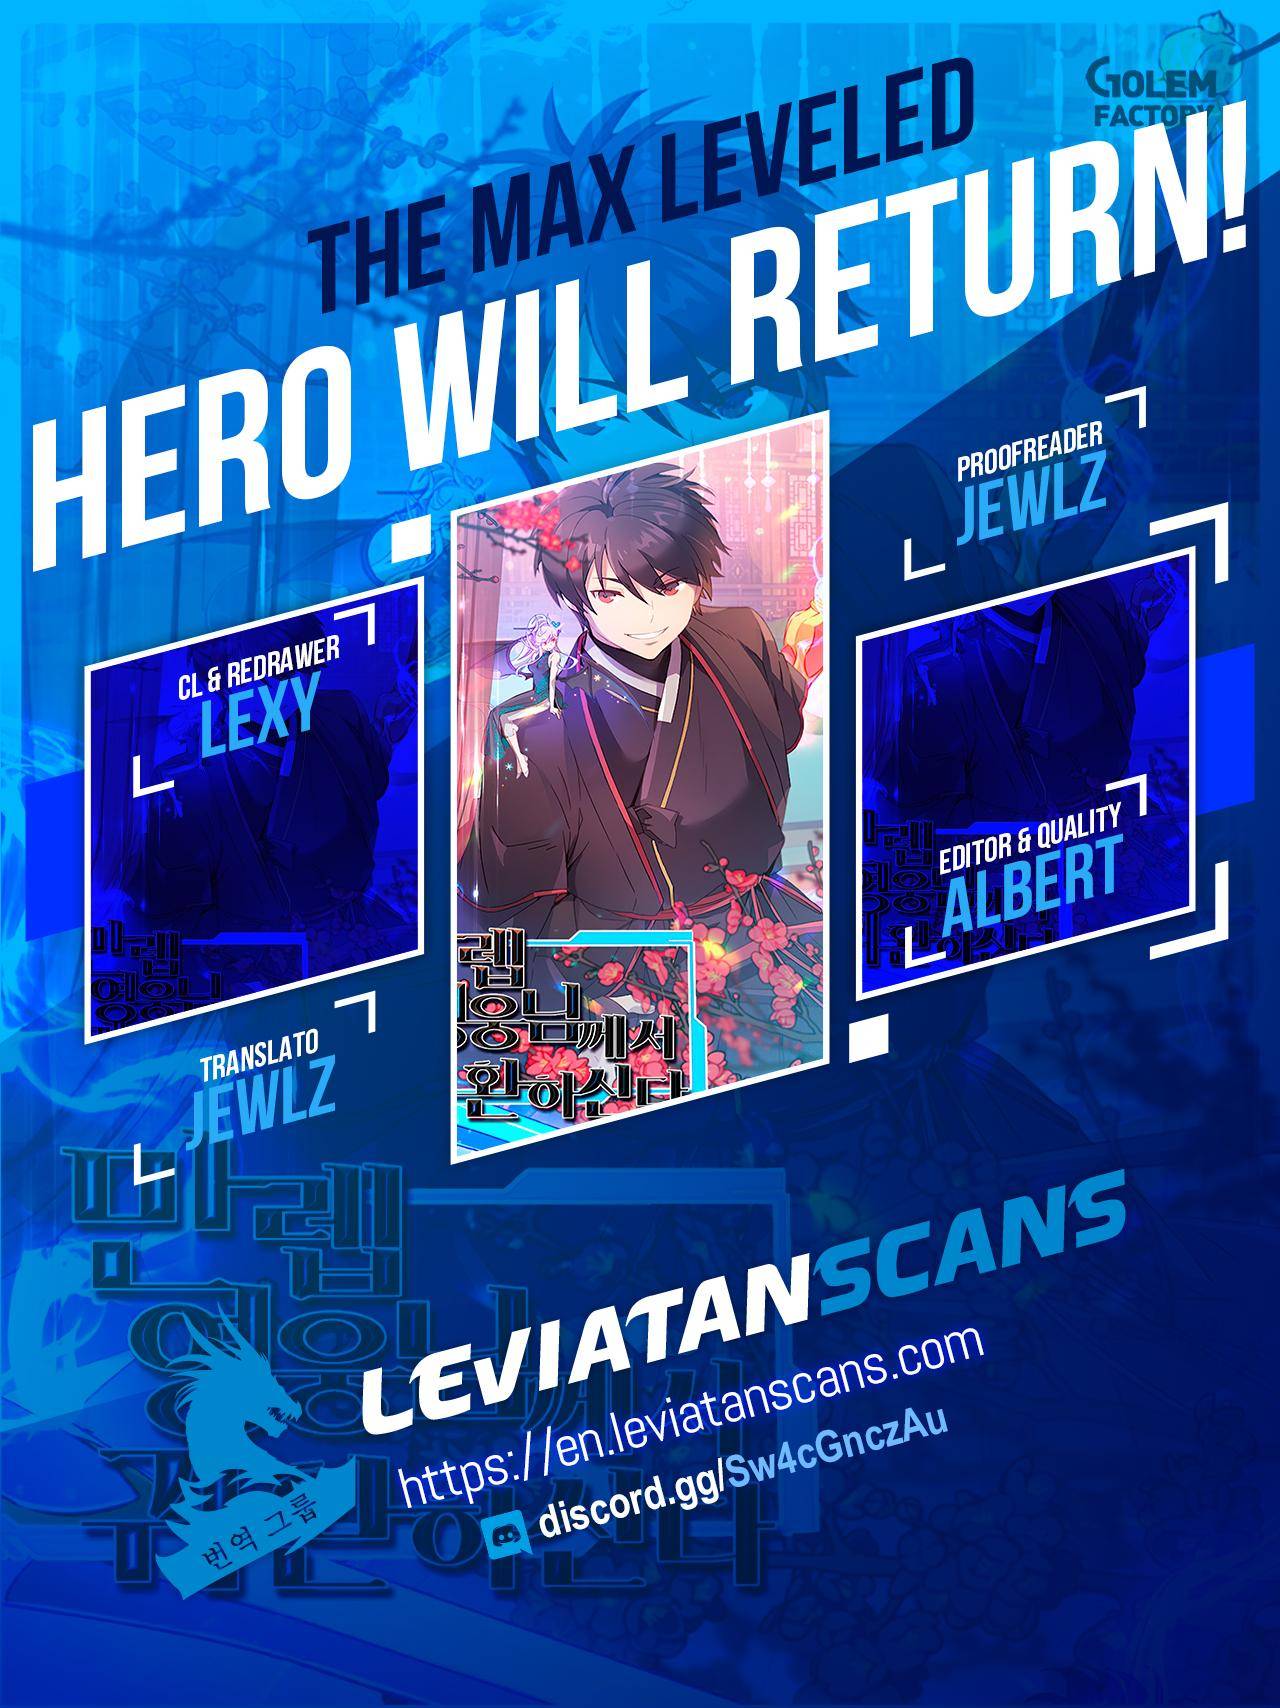 The MAX leveled hero will return! Chapter 125